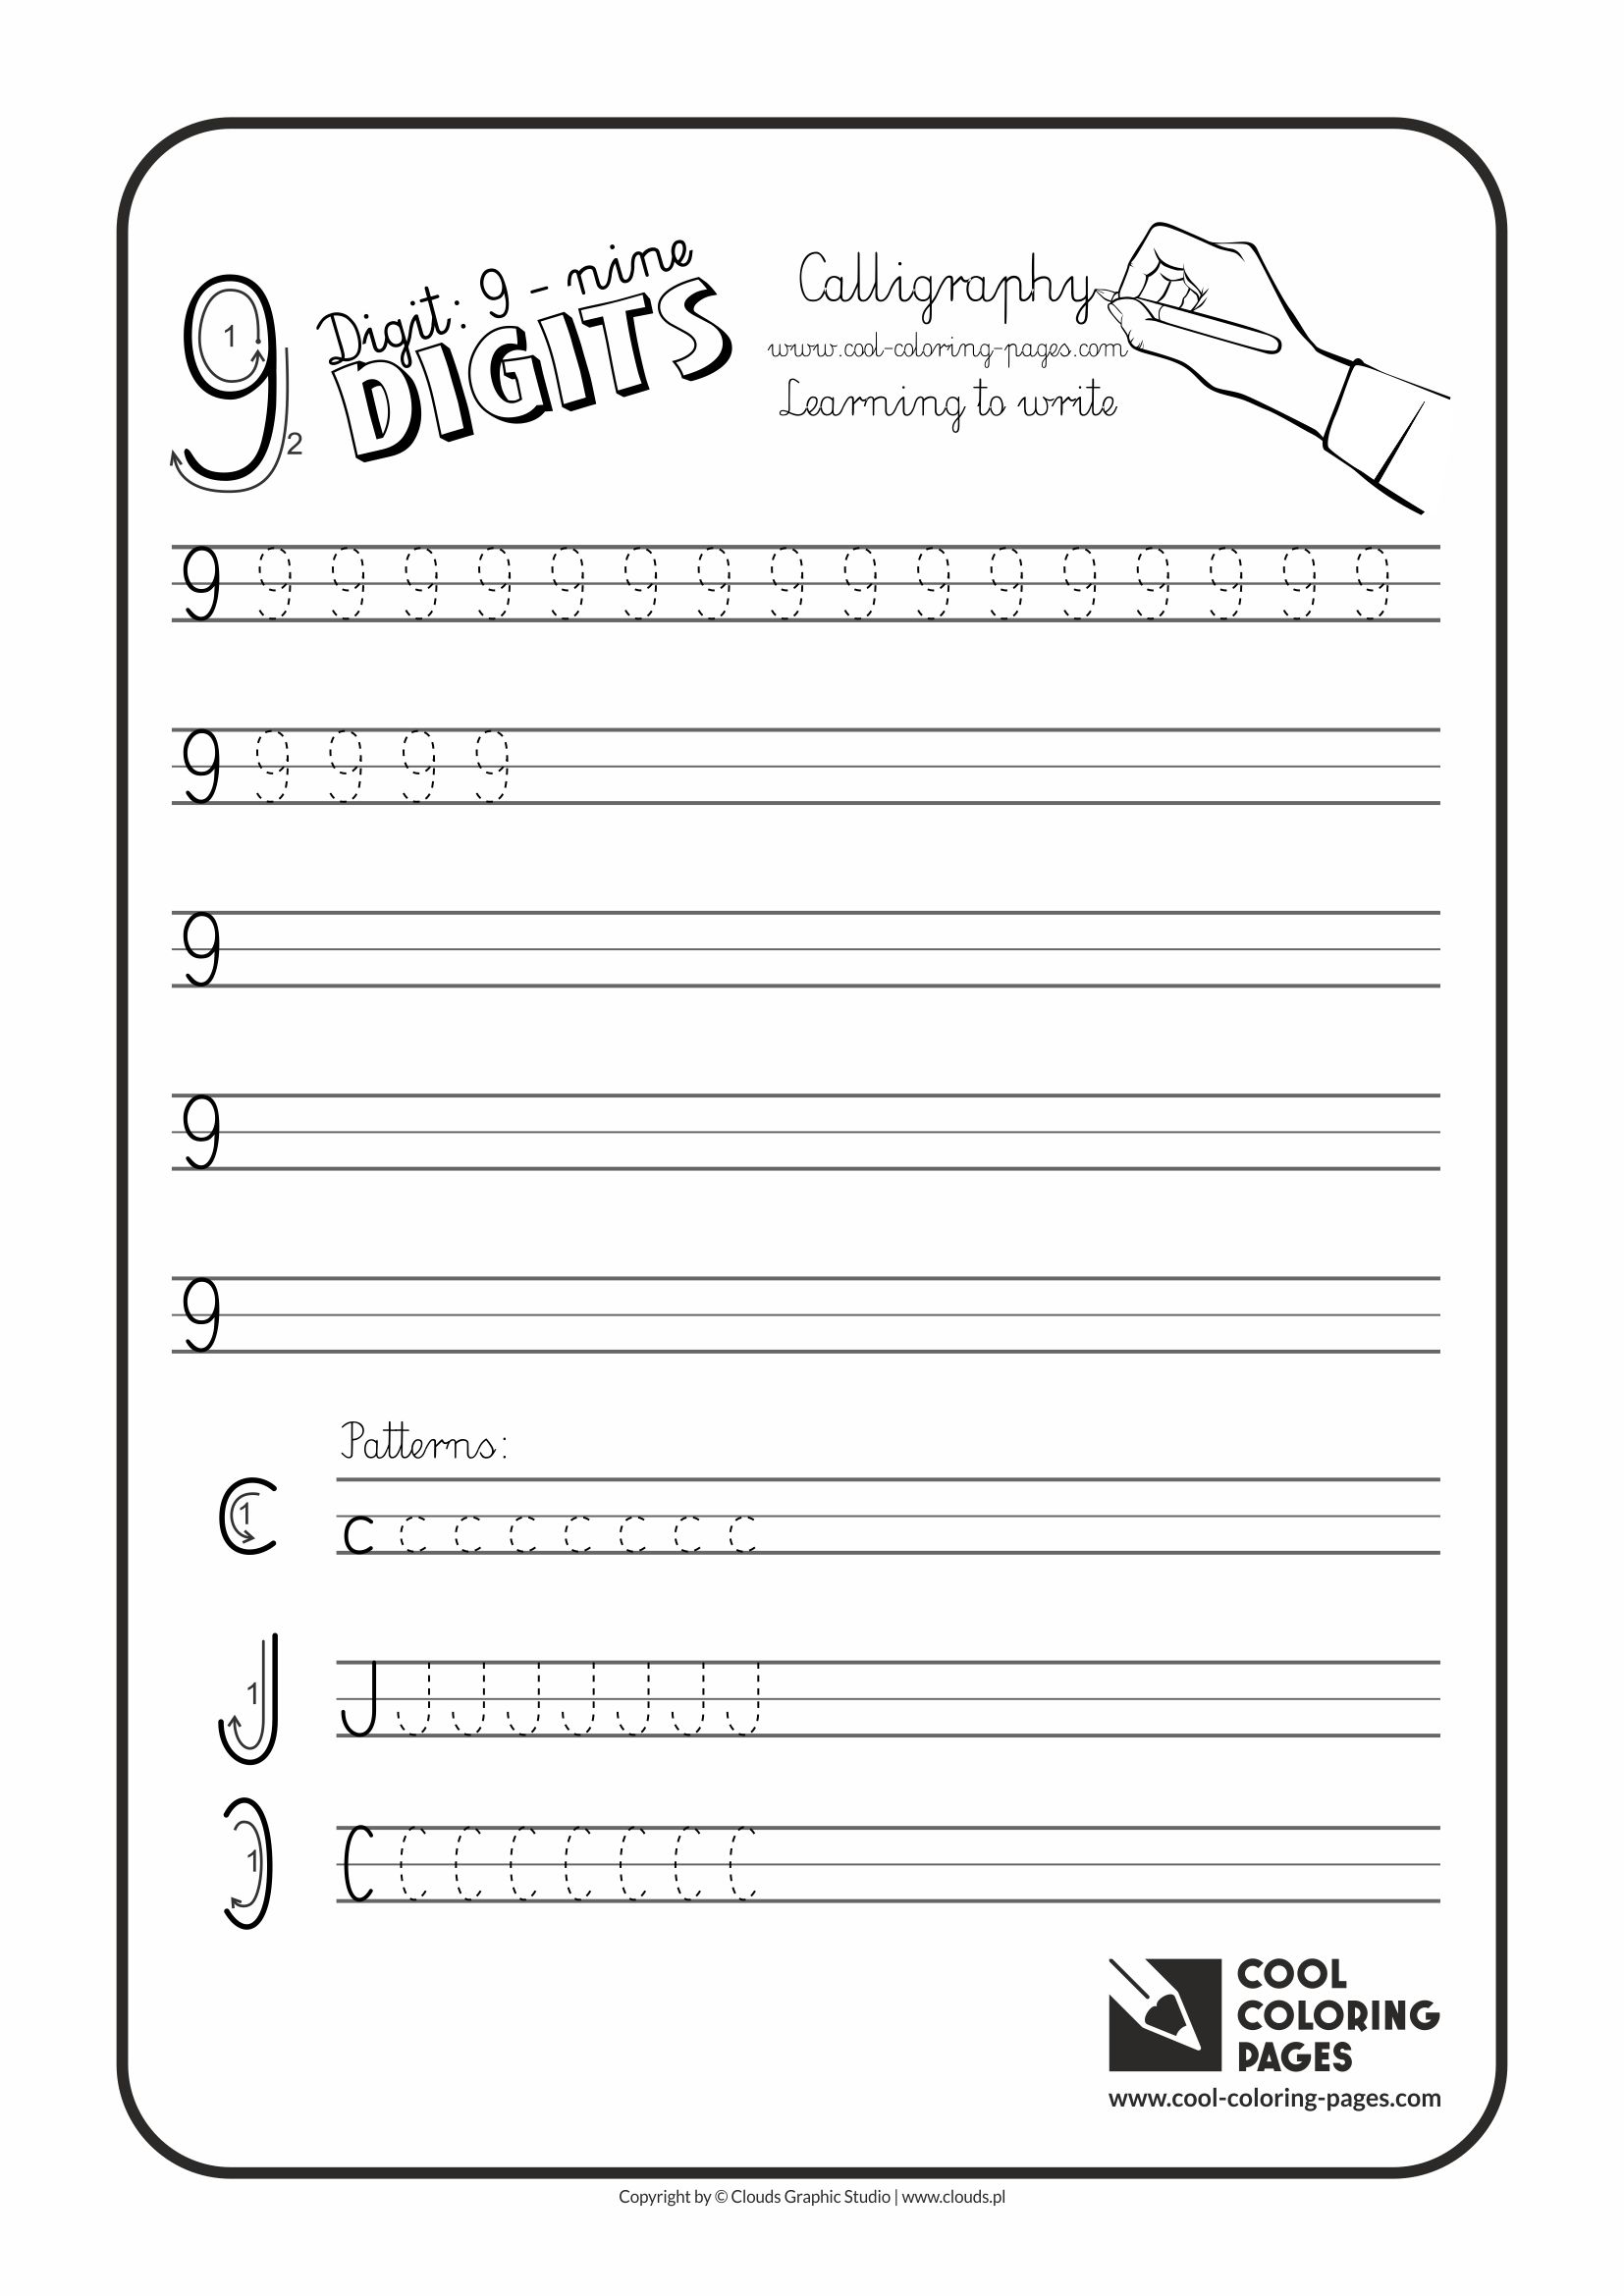 Cool Coloring Pages / Calligraphy / Digit 9 / Handwriting for kids